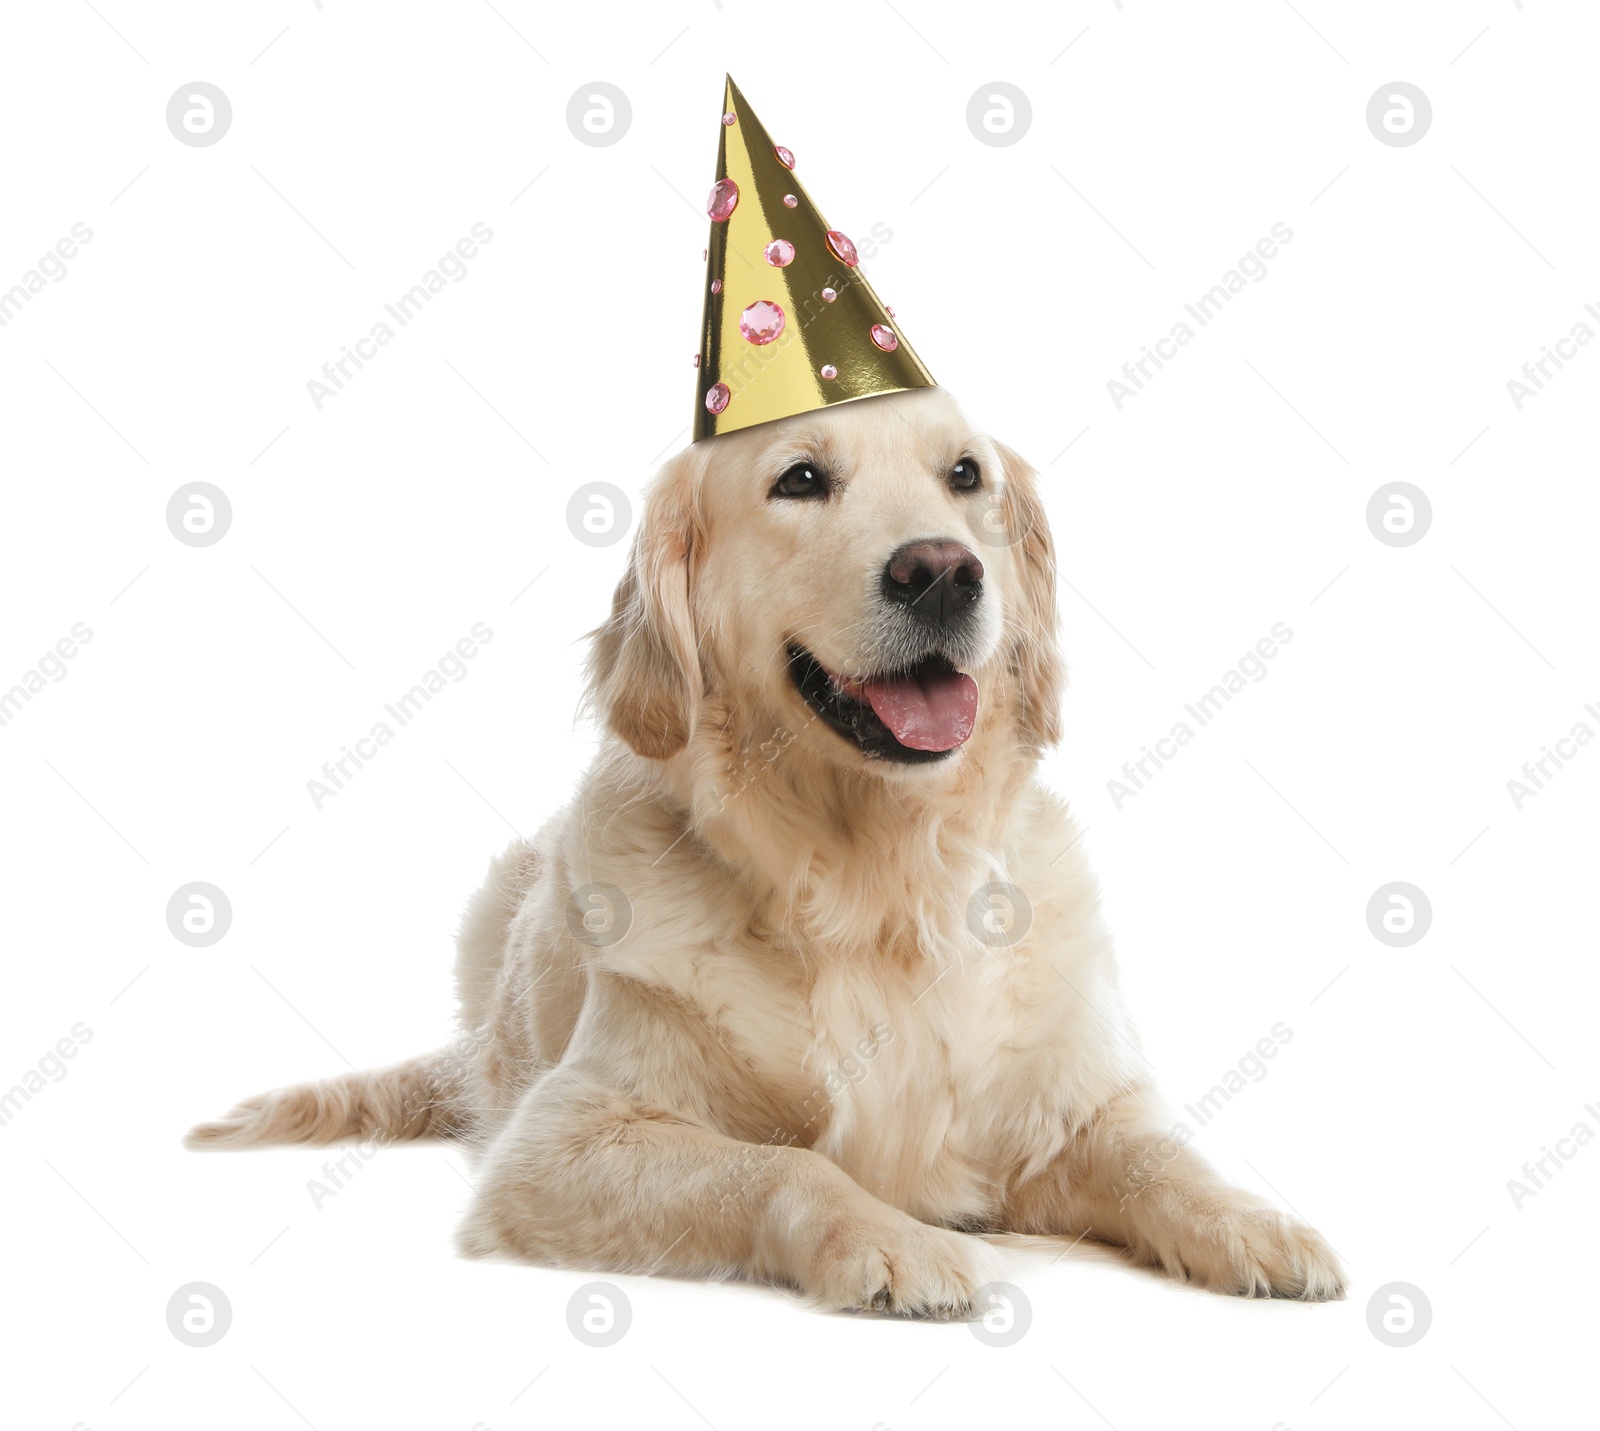 Image of Cute Golden Retriever dog with party hat on white background